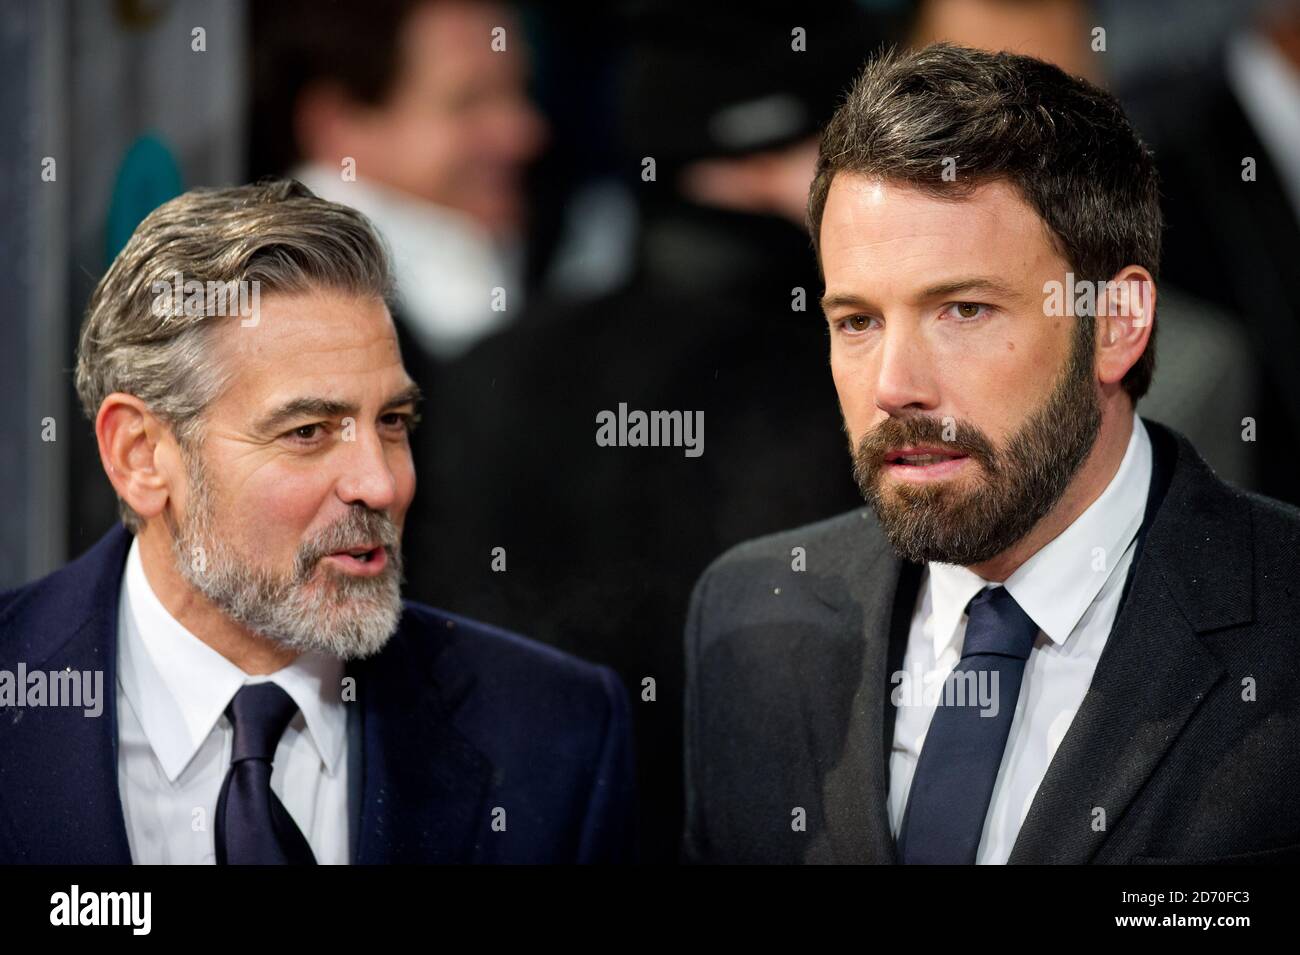 George Clooney and Ben Affleck (right) attending the Bafta Awards, at the Royal Opera House in central London. Stock Photo